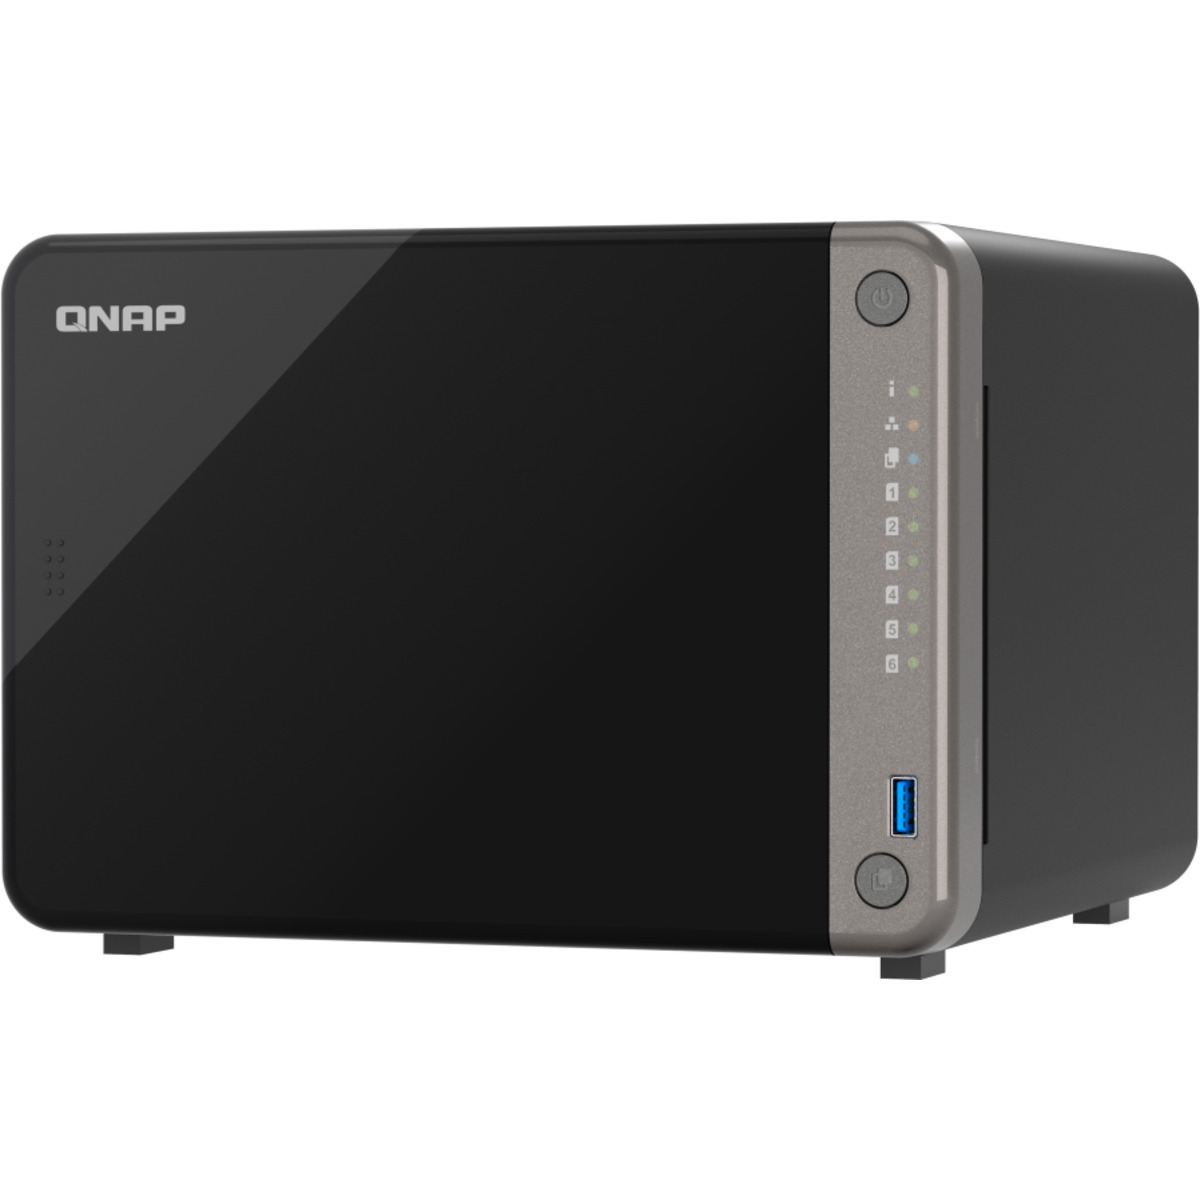 QNAP TS-AI642 24tb 6-Bay Desktop Multimedia / Power User / Business NAS - Network Attached Storage Device 3x8tb Western Digital Red Pro WD8003FFBX 3.5 7200rpm SATA 6Gb/s HDD NAS Class Drives Installed - Burn-In Tested TS-AI642